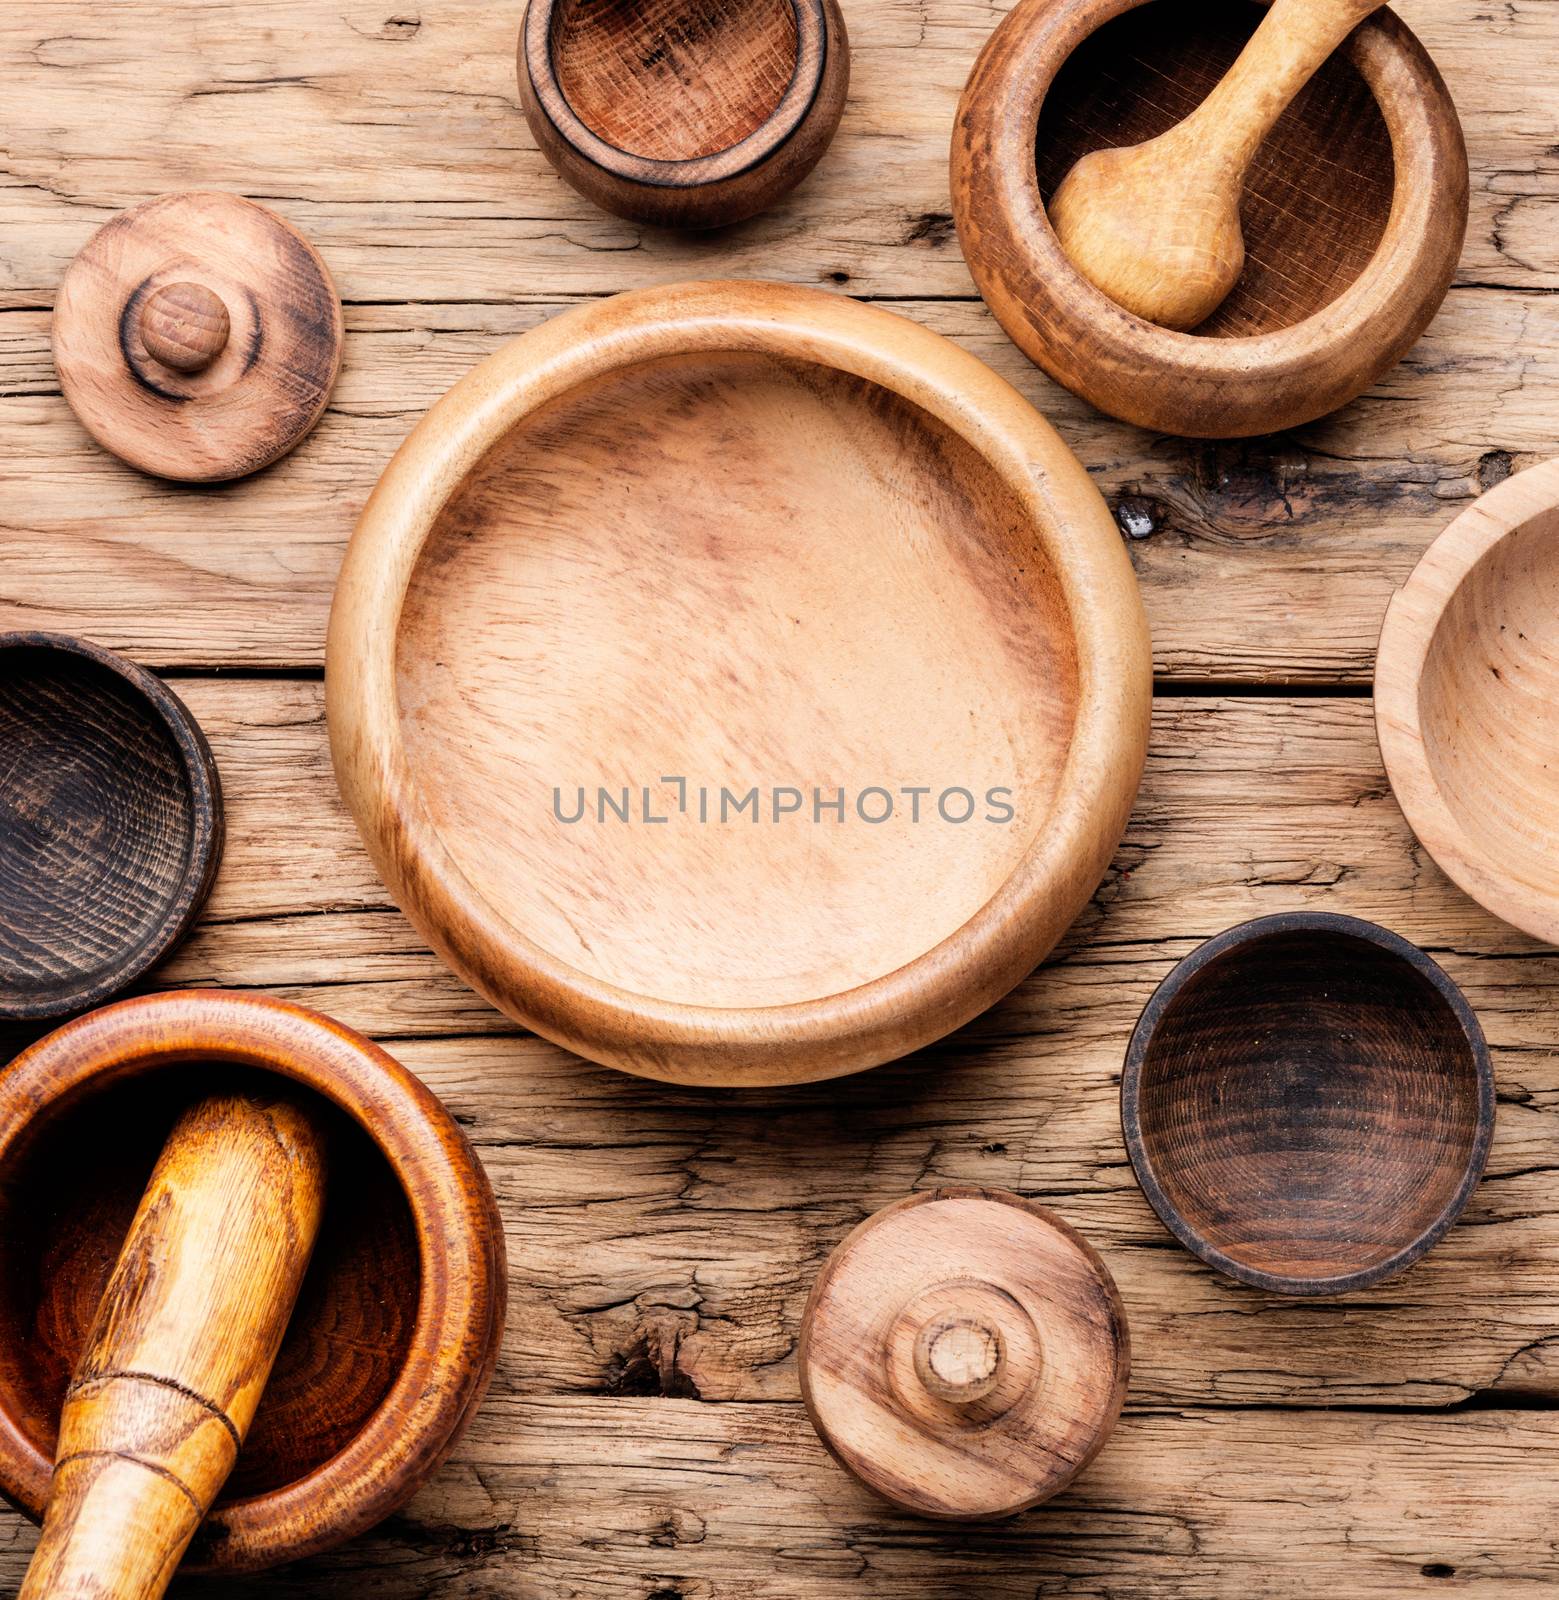 Empty wooden mortar and pestle on wooden old background.Cooking utensils